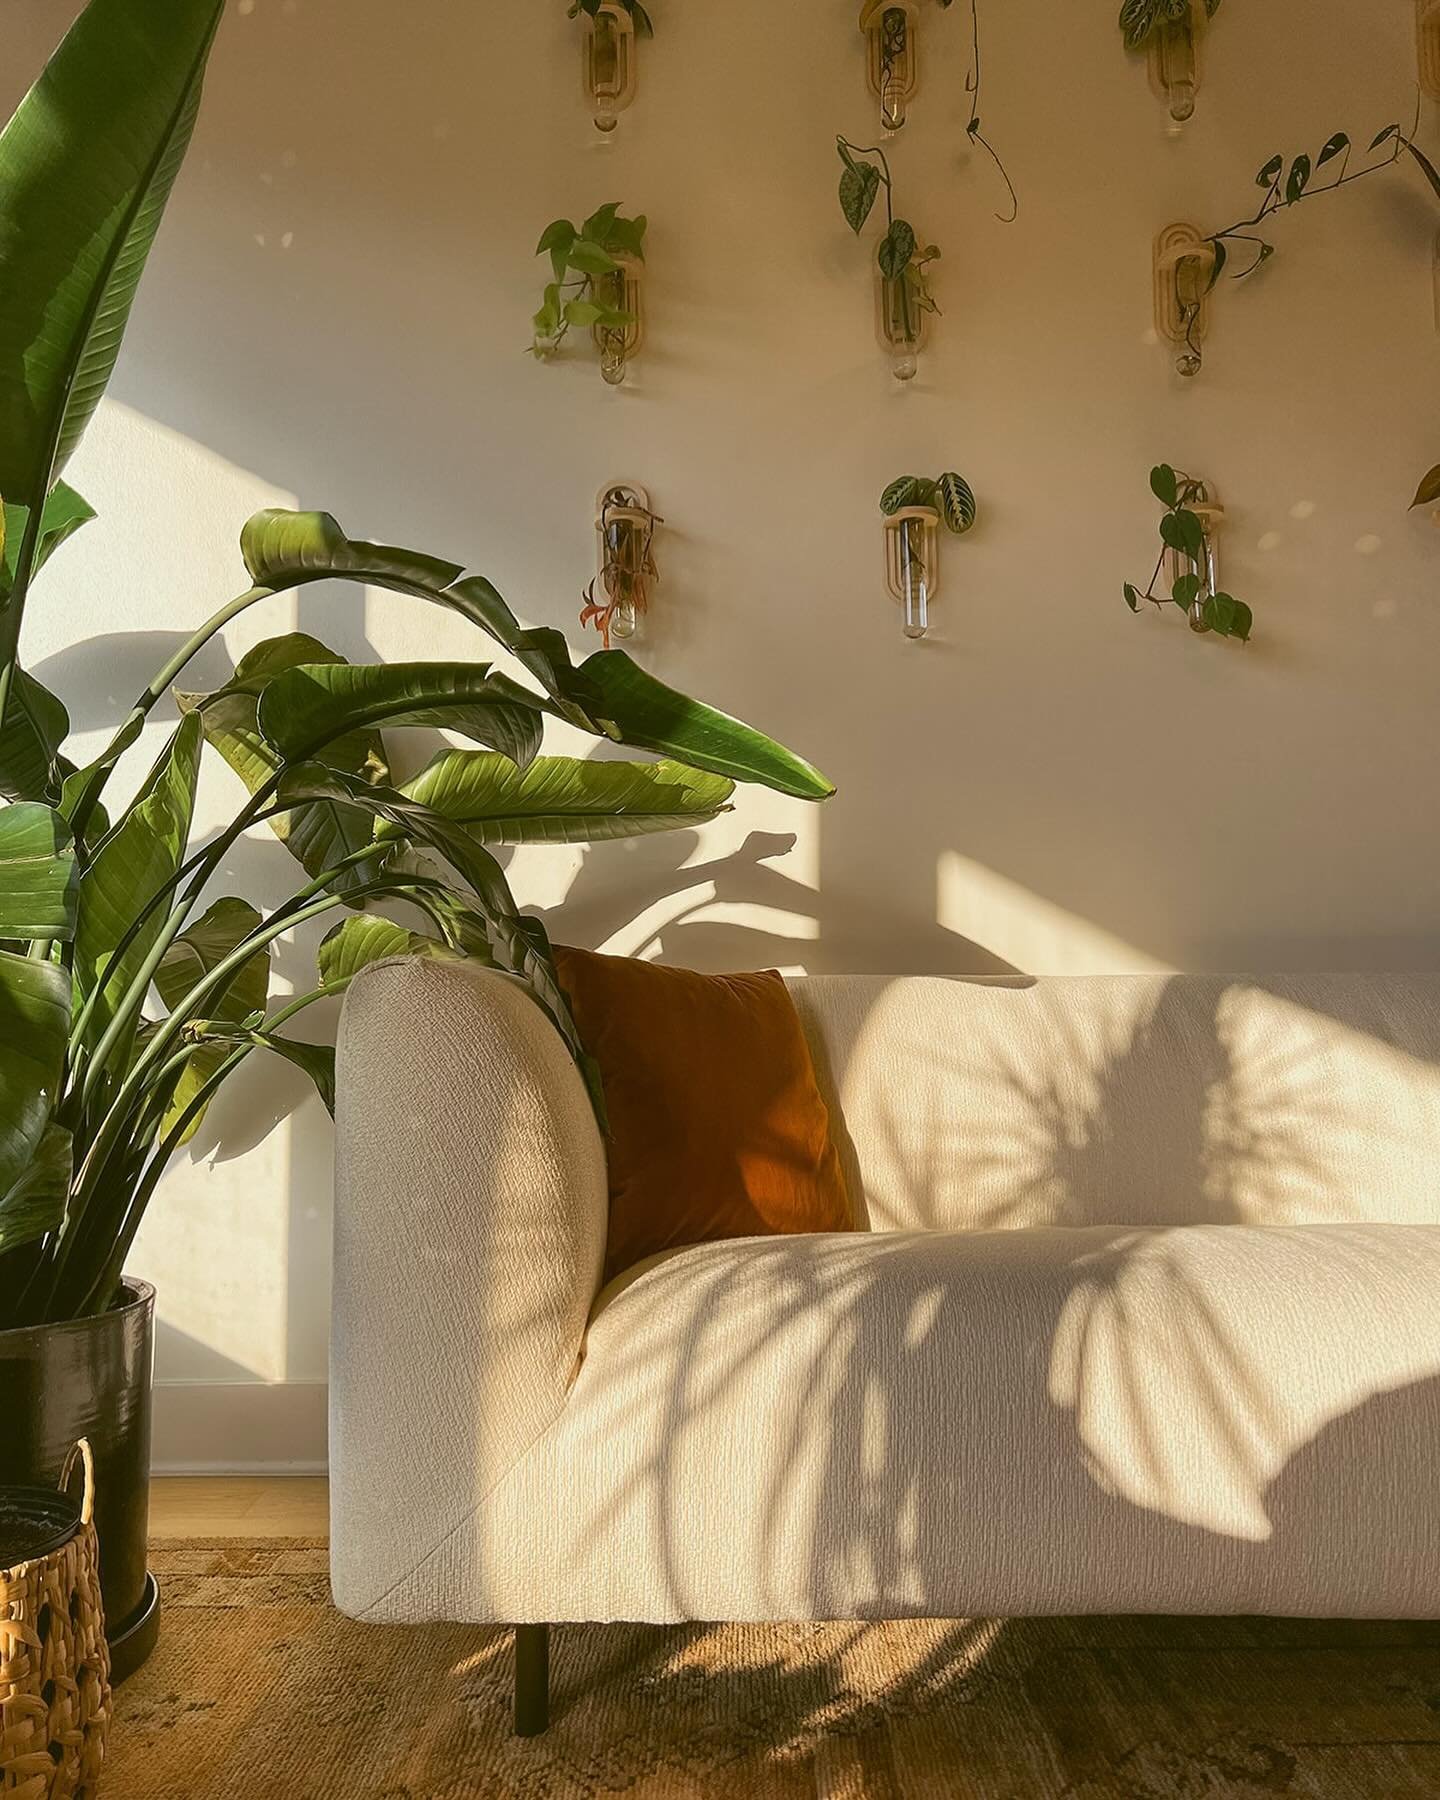 Step into the studio 🌿✨ 

Our lobby is a space where everyone is embraced with warmth, compassion &amp; comfort. From the abundance of greenery (shoutout @plantsavvyco) to the soothing tunes, we invite you to relax before your treatment begins. 
.
.